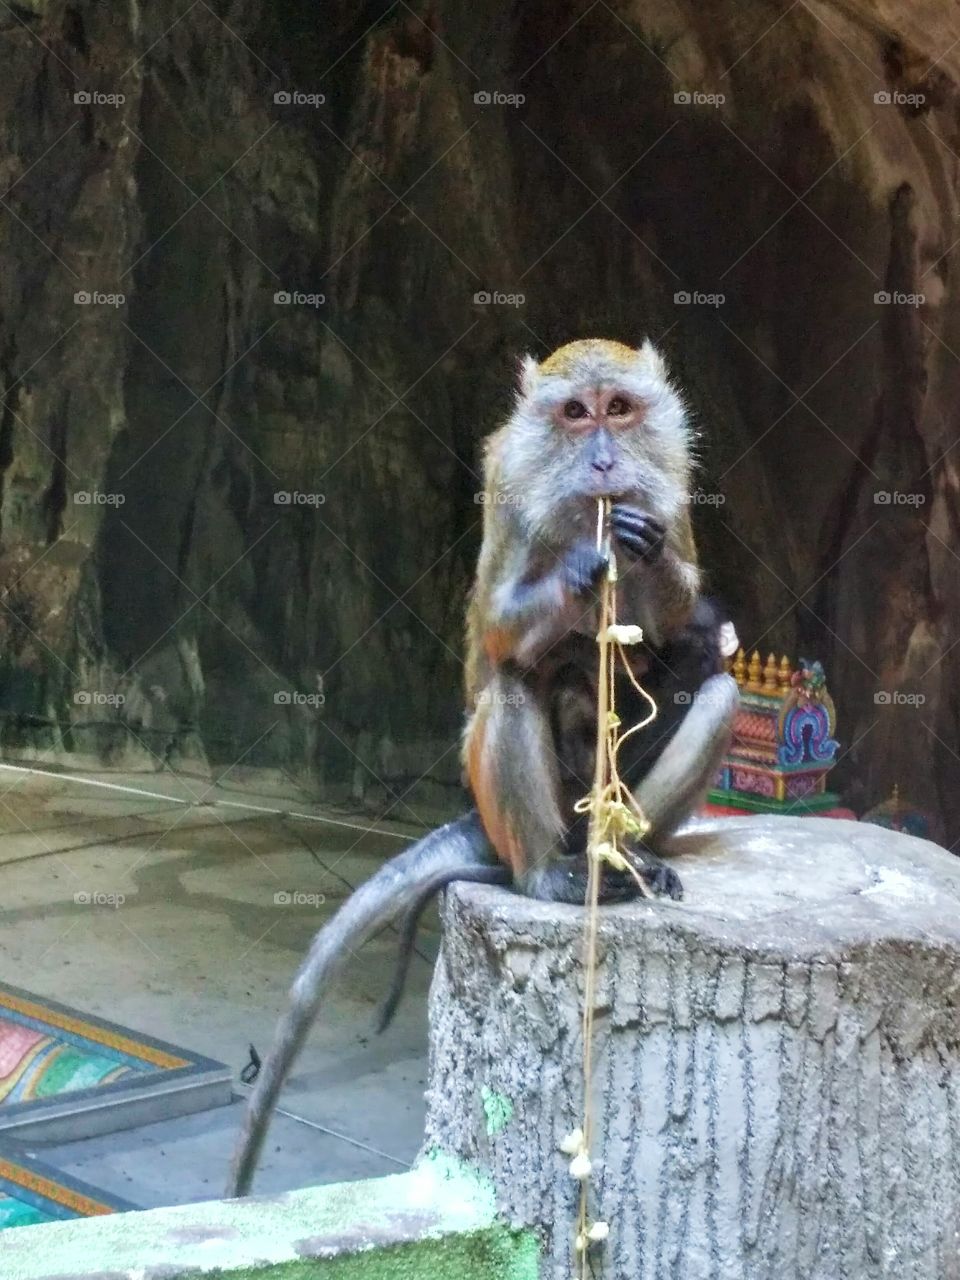 Funny monkey playing with rope